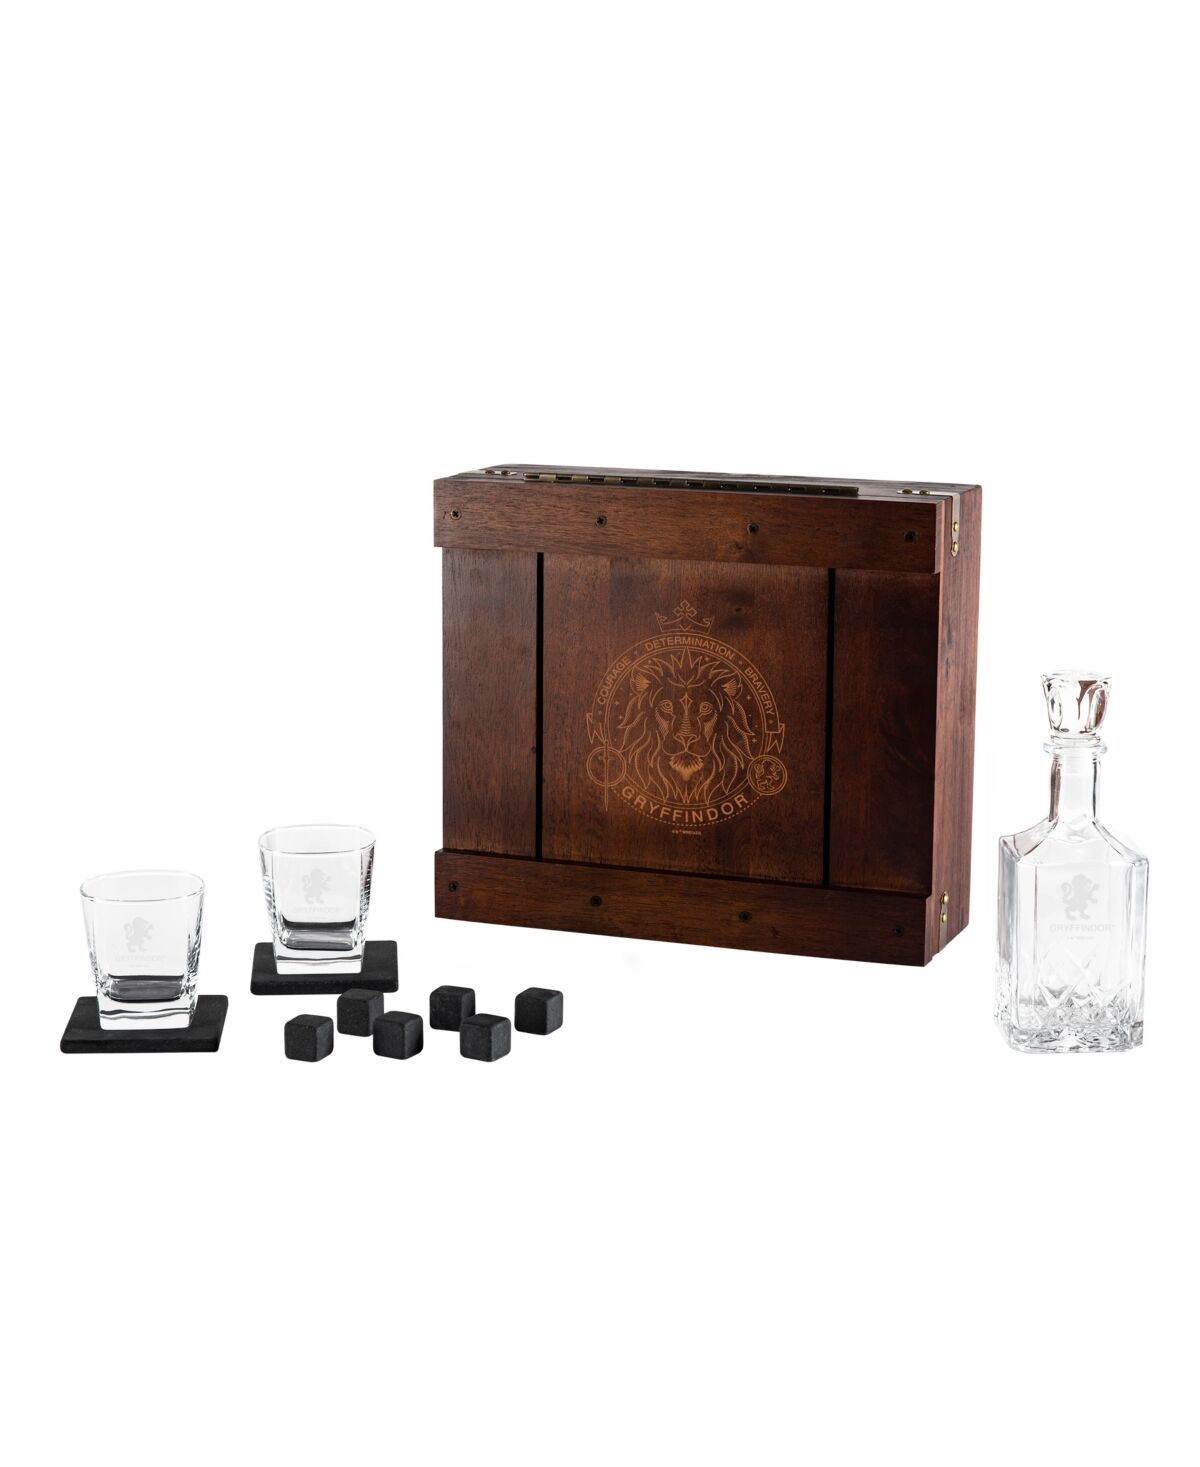 Legacy Harry Potter Gryffindor Whiskey Box Gift 12 Piece Set with Decanter - Oak